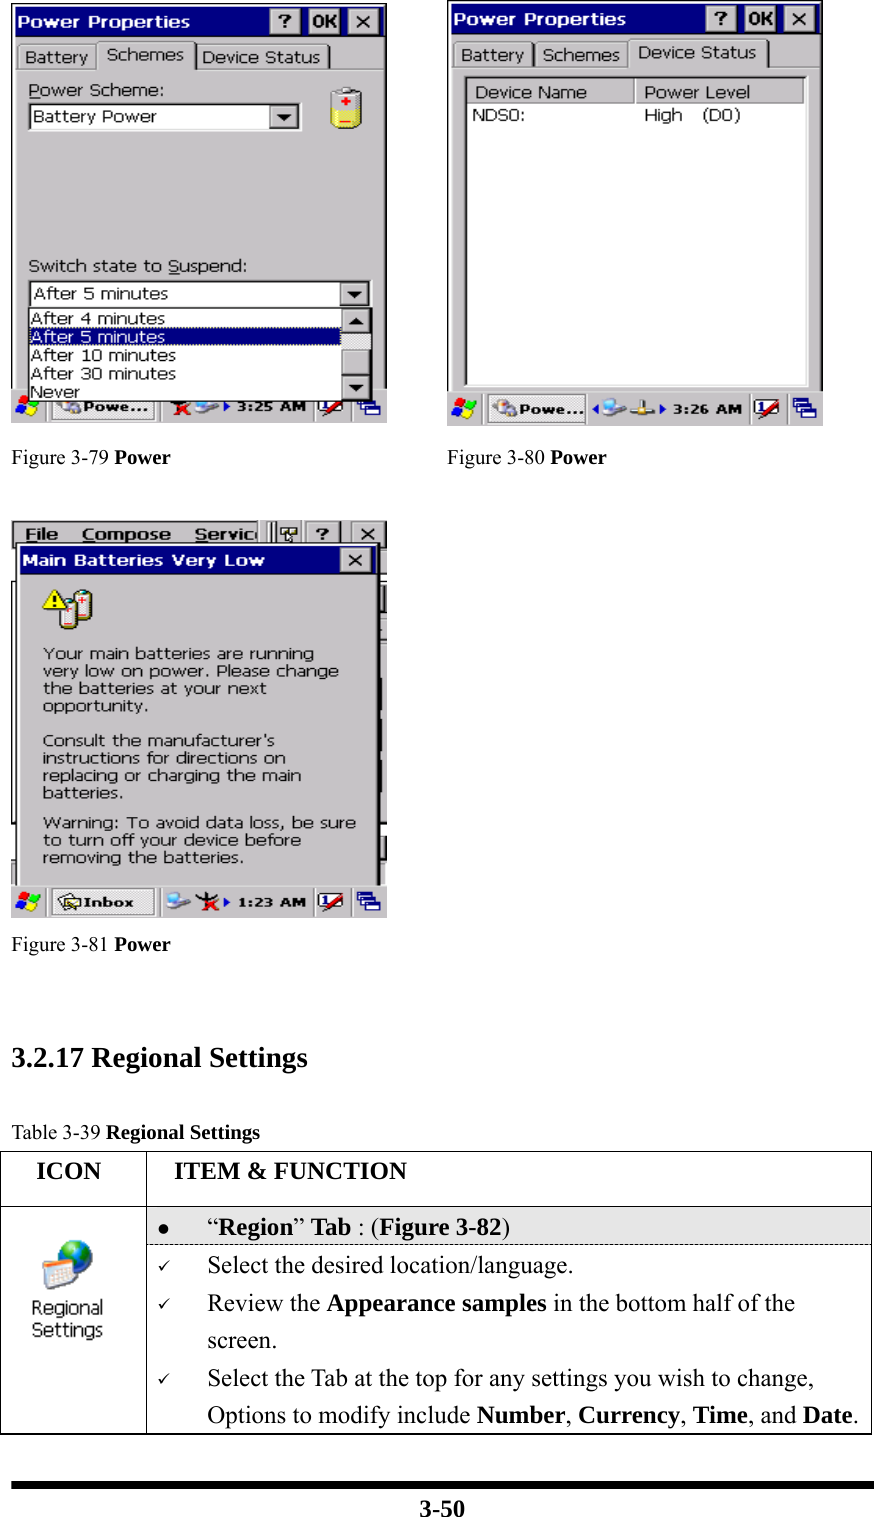  3-50   Figure 3-79 Power Figure 3-80 Power     Figure 3-81 Power    3.2.17 Regional Settings  Table 3-39 Regional Settings   ICON   ITEM &amp; FUNCTION z “Region” Tab : (Figure 3-82)  9 Select the desired location/language. 9 Review the Appearance samples in the bottom half of the screen. 9 Select the Tab at the top for any settings you wish to change, Options to modify include Number, Currency, Time, and Date.